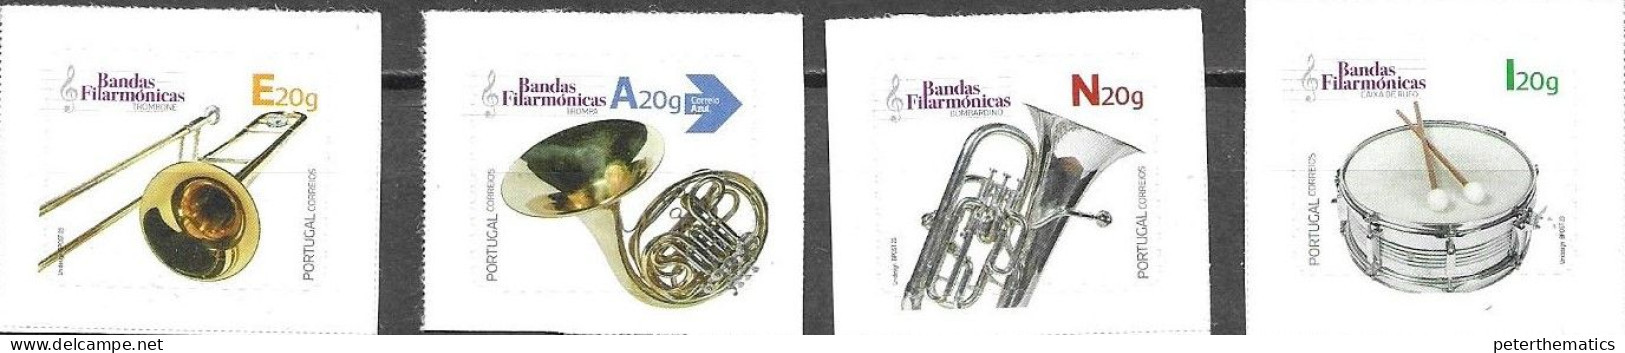 PORTUGAL, 2023, MNH, MUSIC, MUSICAL INSTRUMENTS, TRUMPETS, DRUMS, 4v, S/A - Musique